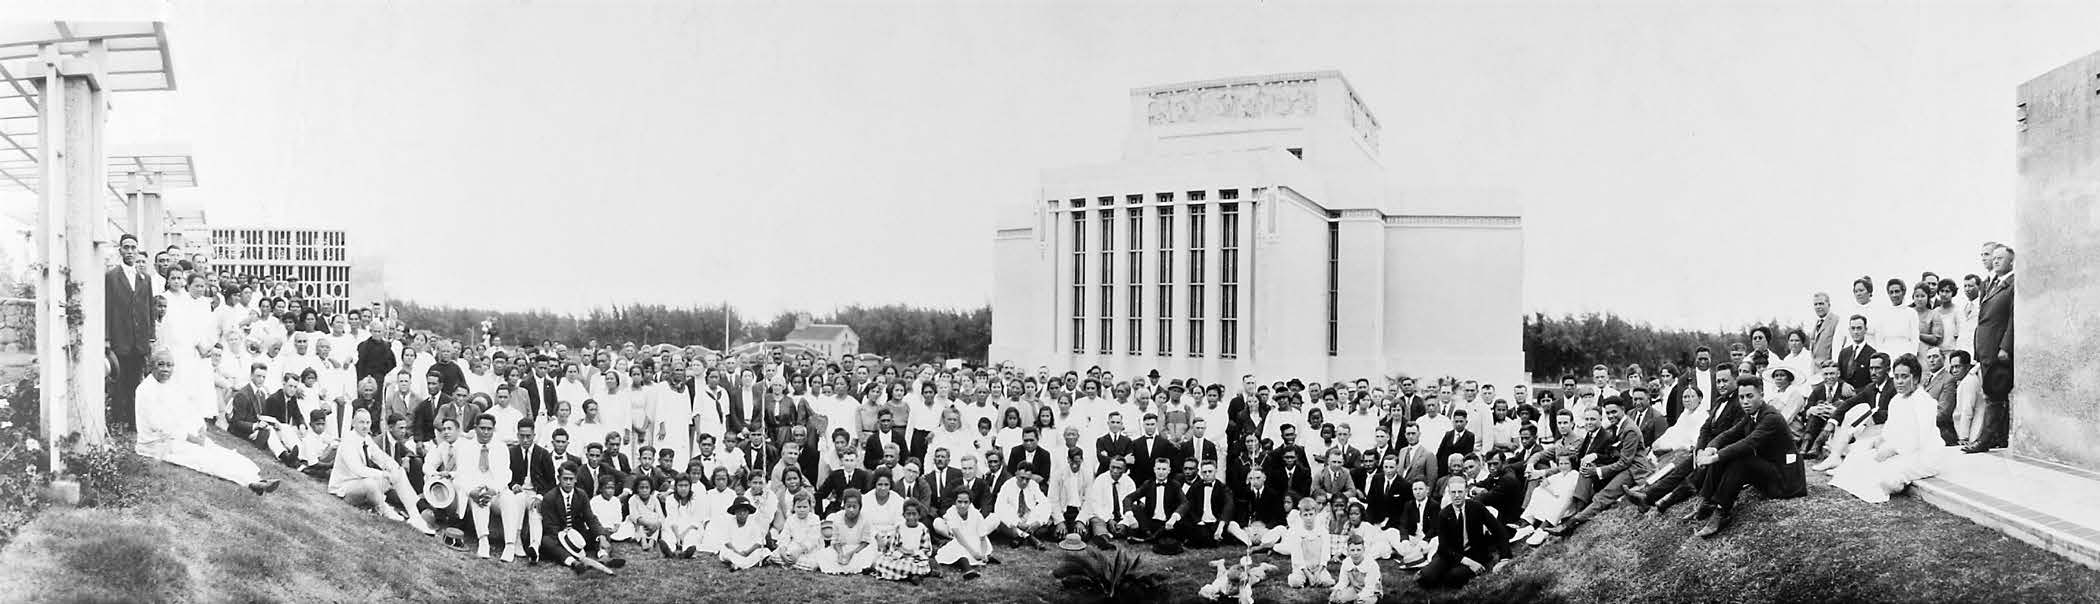 Gathering of Hawaiian Saints at the temple on 6 April 1922. Such faithful members have always been the lifeblood of service in the Laie Hawaii Temple. Courtesy of Church History Library.